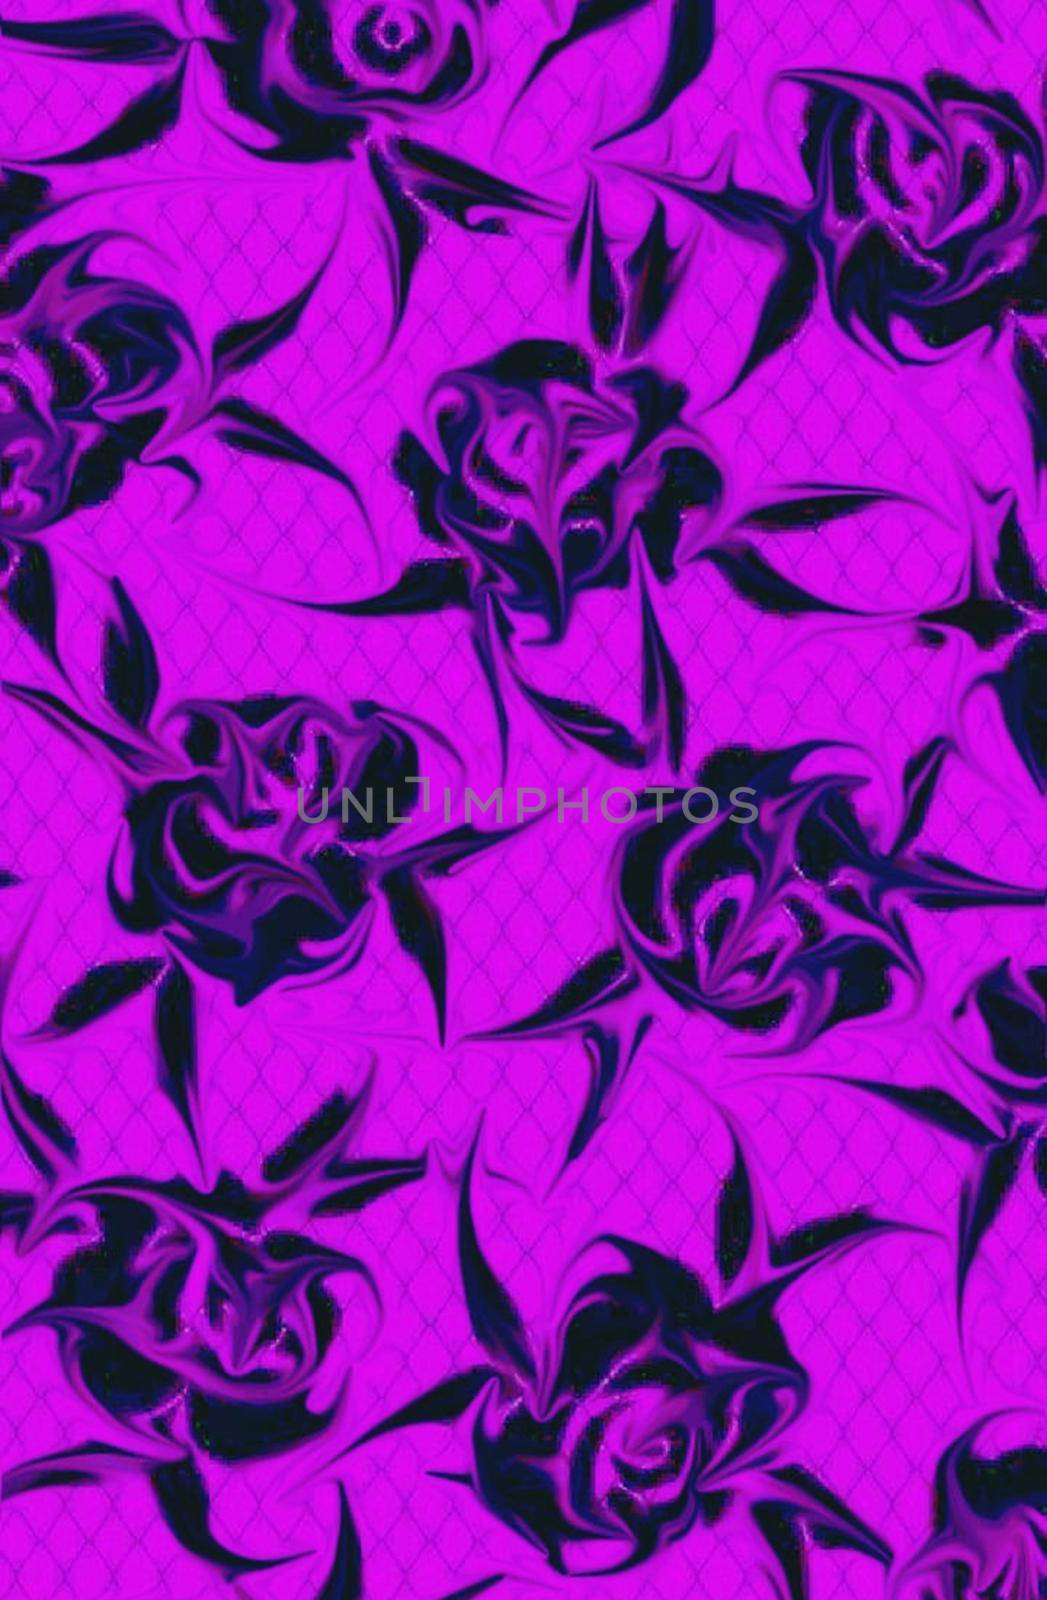 A Elegant flowers backgrounds for wrappers, wallpapers, postcards by TravelSync27